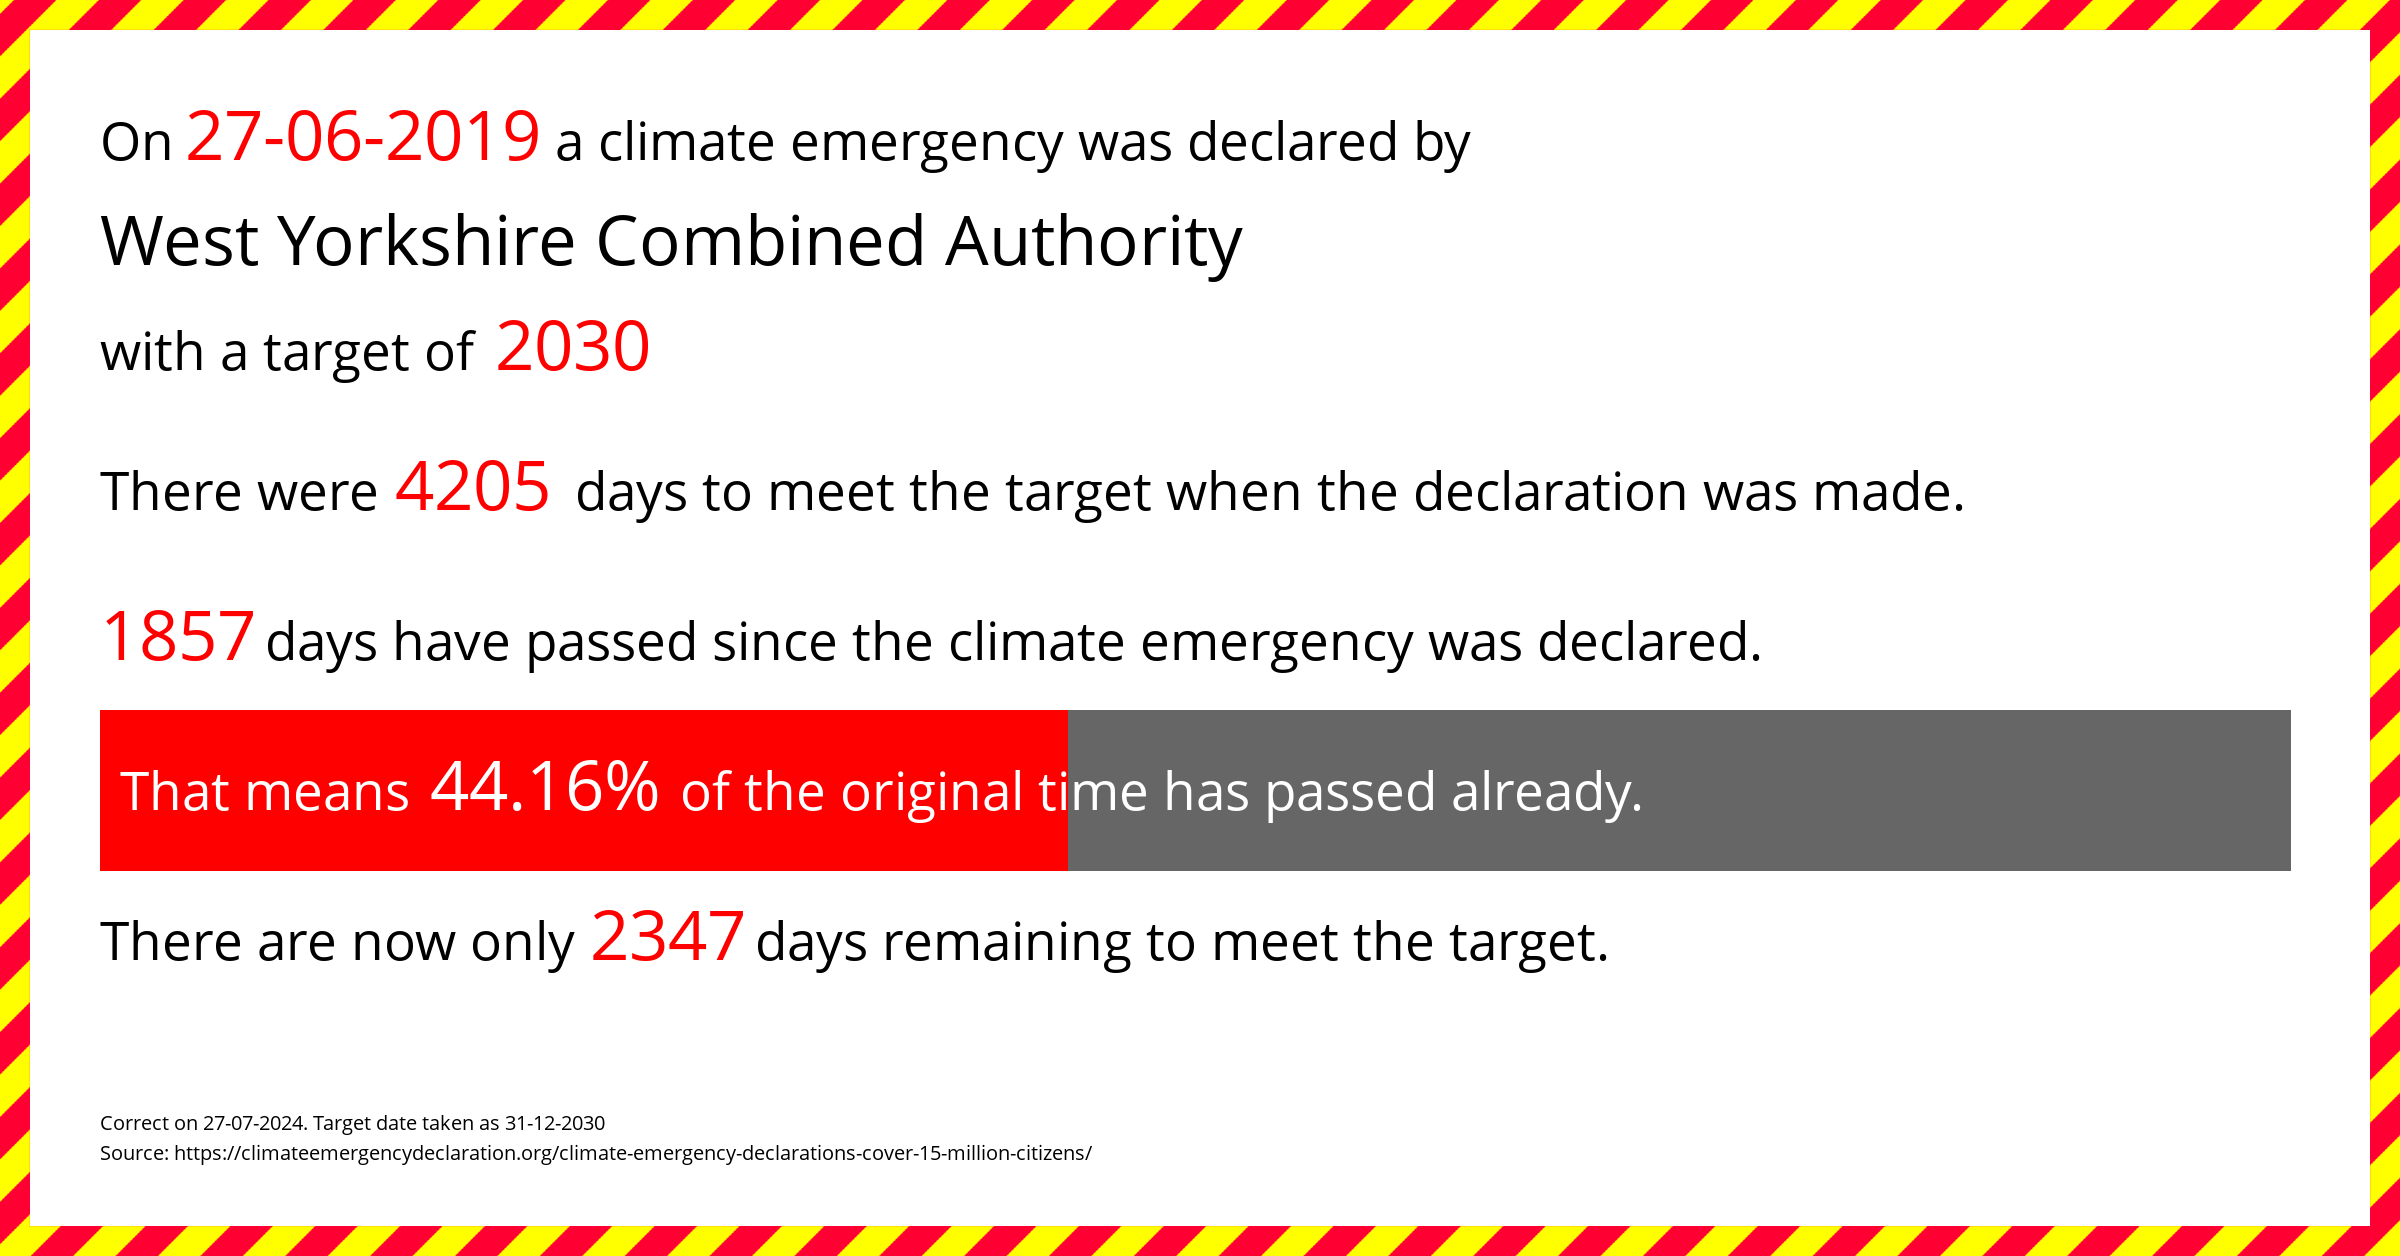 West Yorkshire Combined Authority declared a Climate emergency on Thursday 27th June 2019, with a target of 2030.